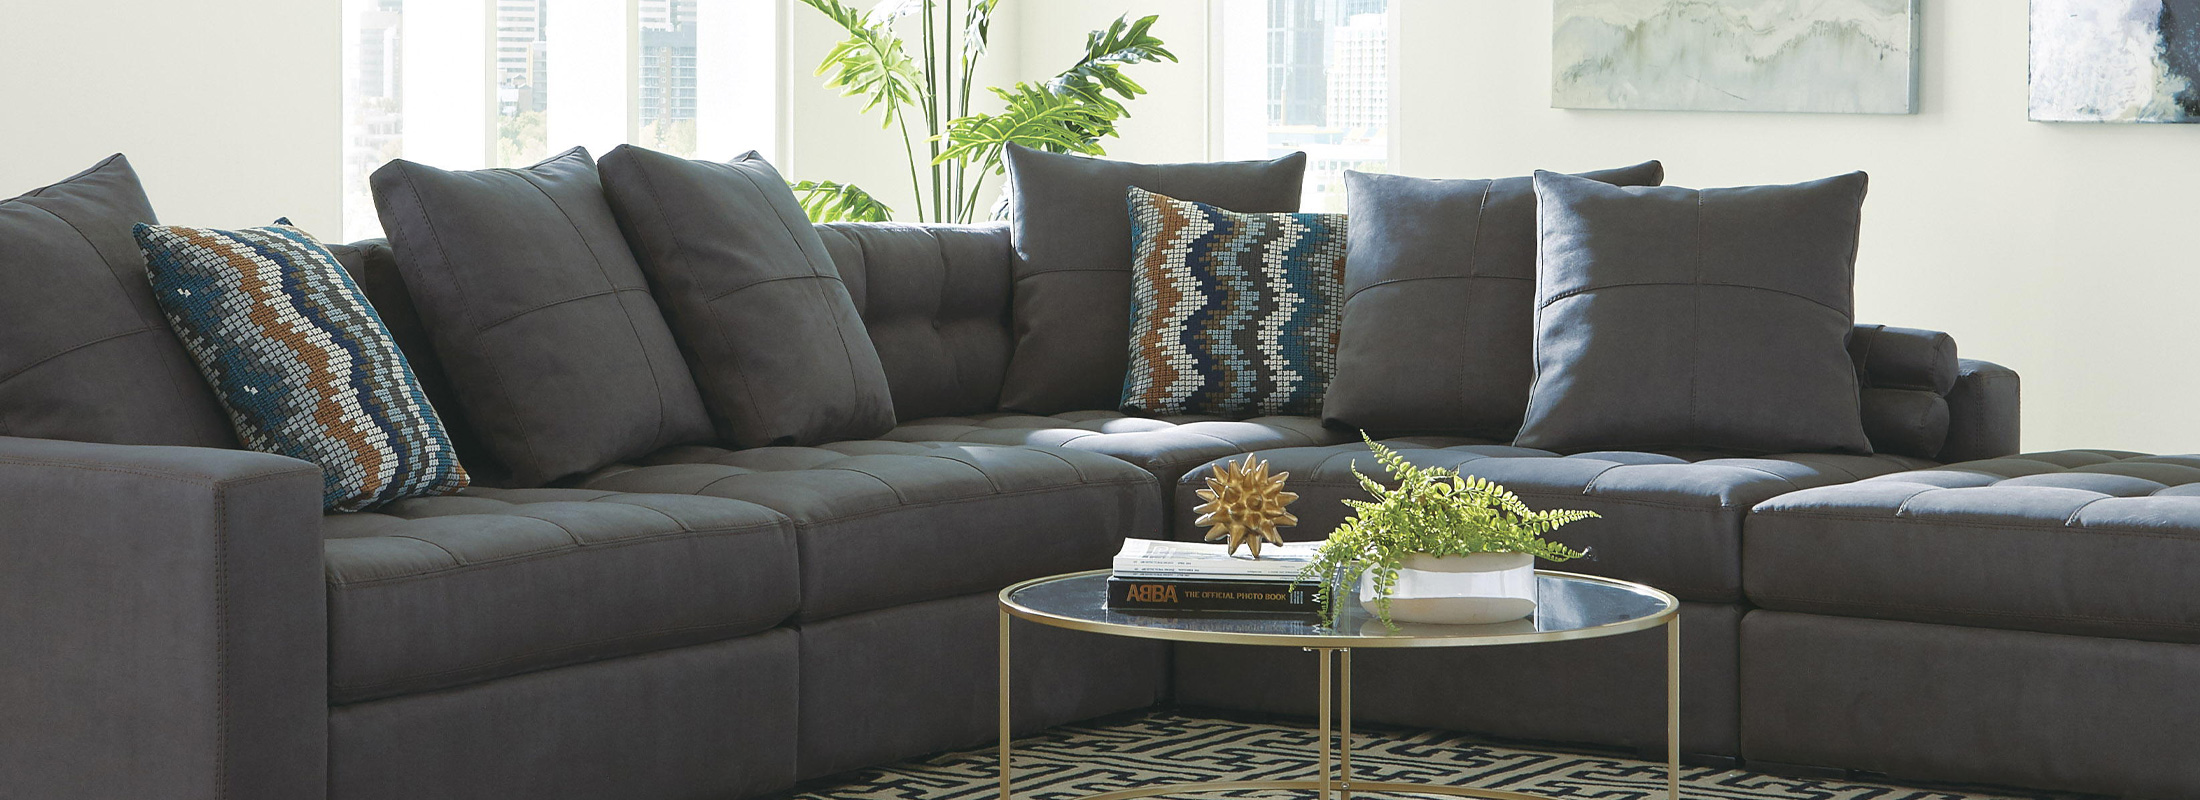 Dark grey sectional with 5 dark grey pillows and two patterened pillows